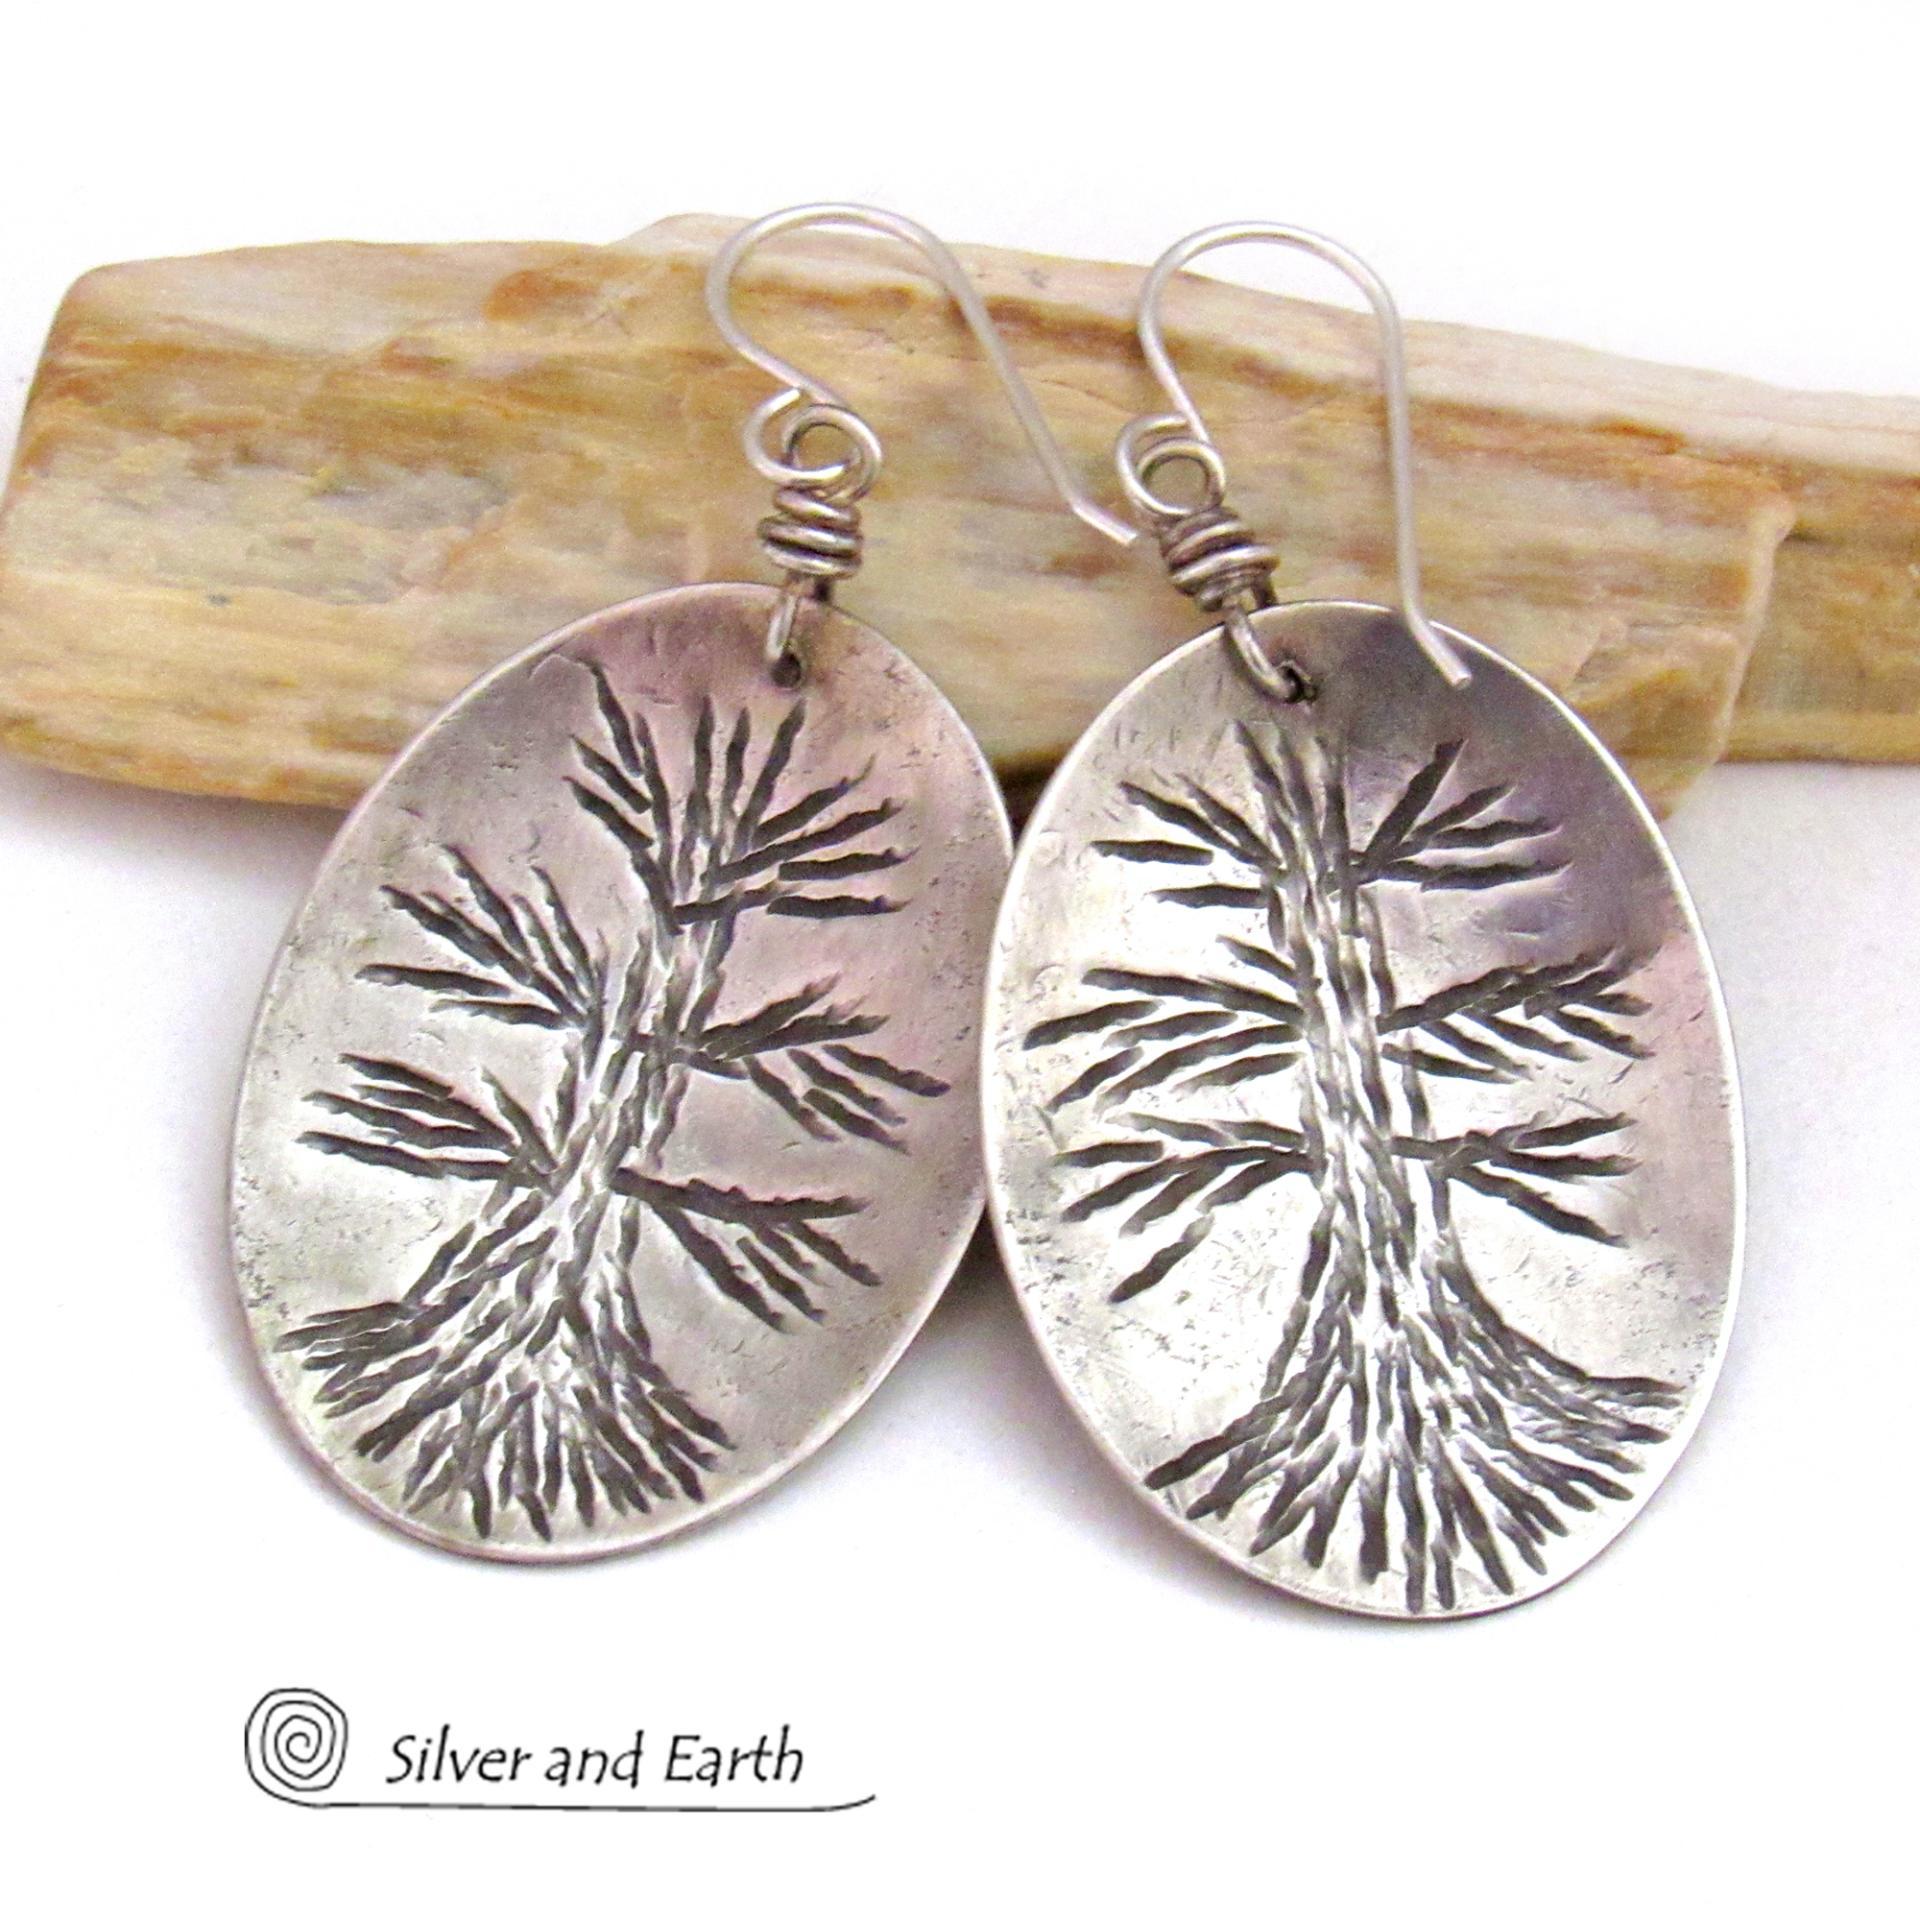 Tree of Life Sterling Silver Earrings - Earthy Nature Jewelry Gifts for Women